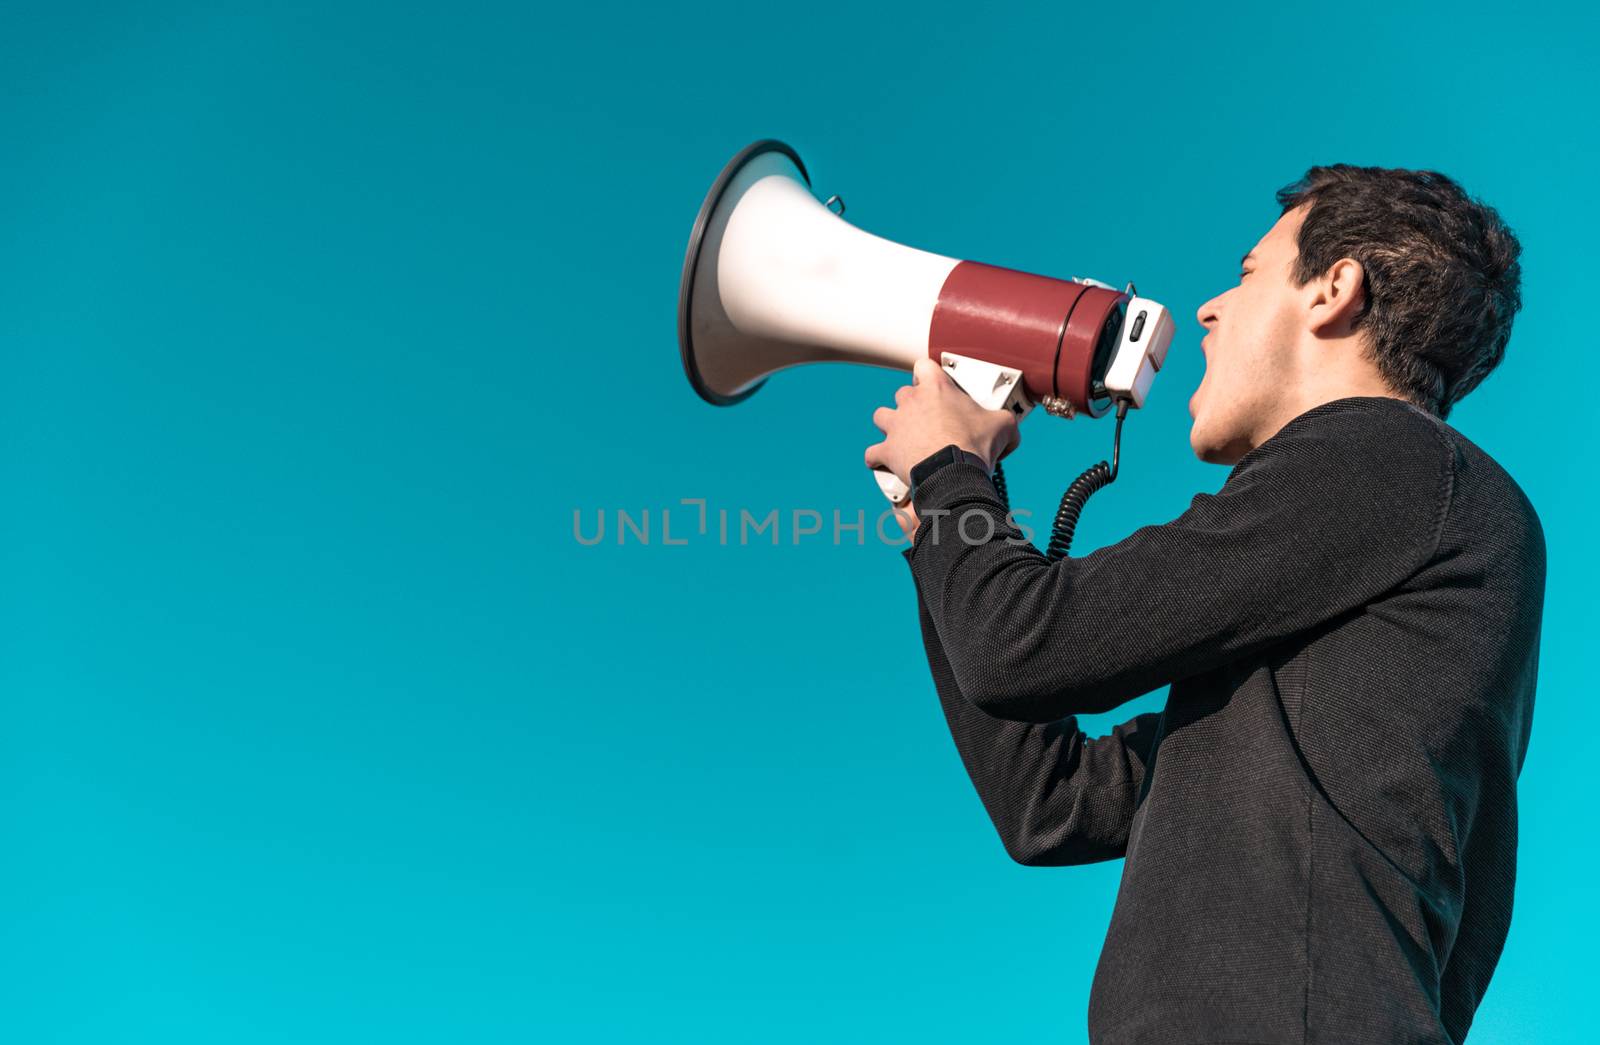 megaphone as a tool for loud communication of important news and information.